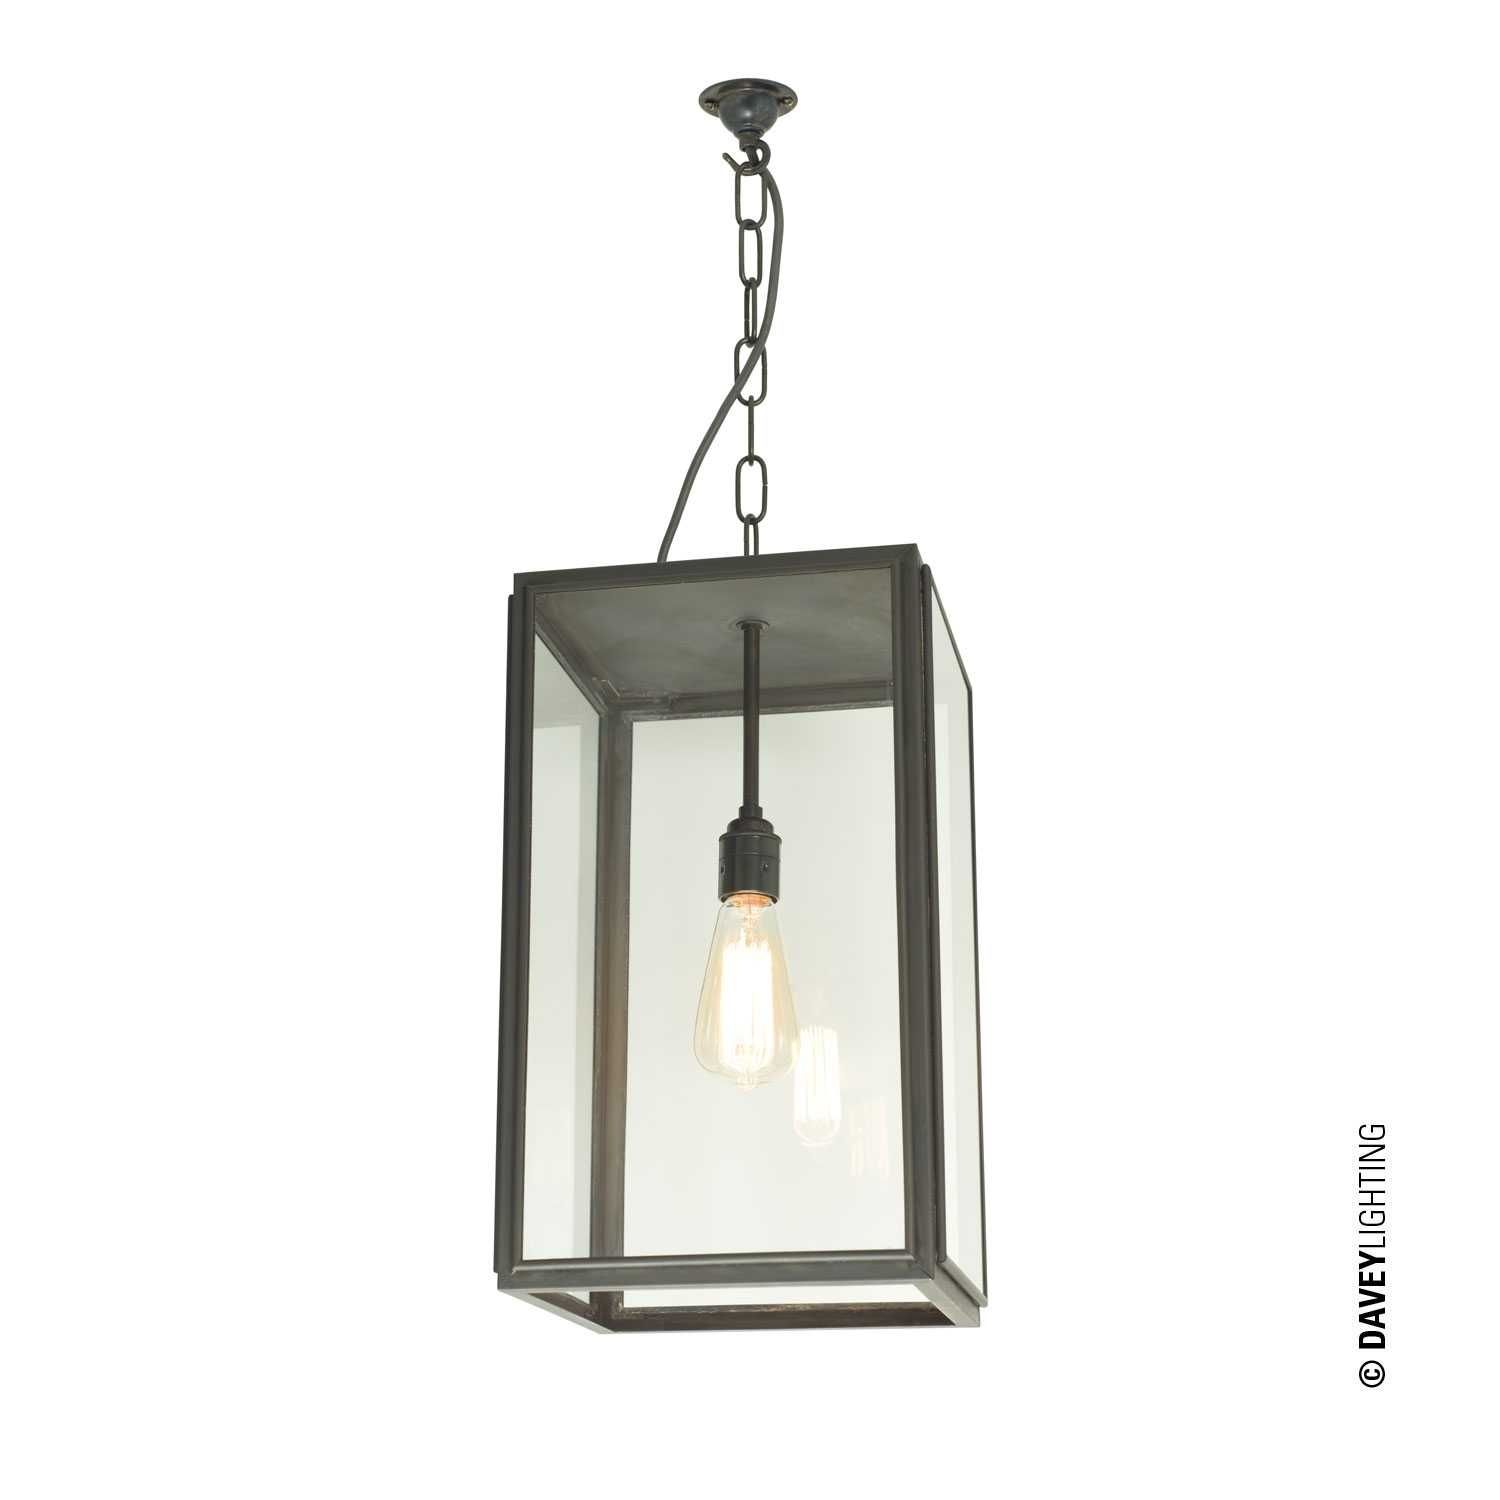 Modern Outdoor Hanging Light Trends With Pendant Lighting Ideas Throughout Contemporary Outdoor Pendant Lighting (View 12 of 15)